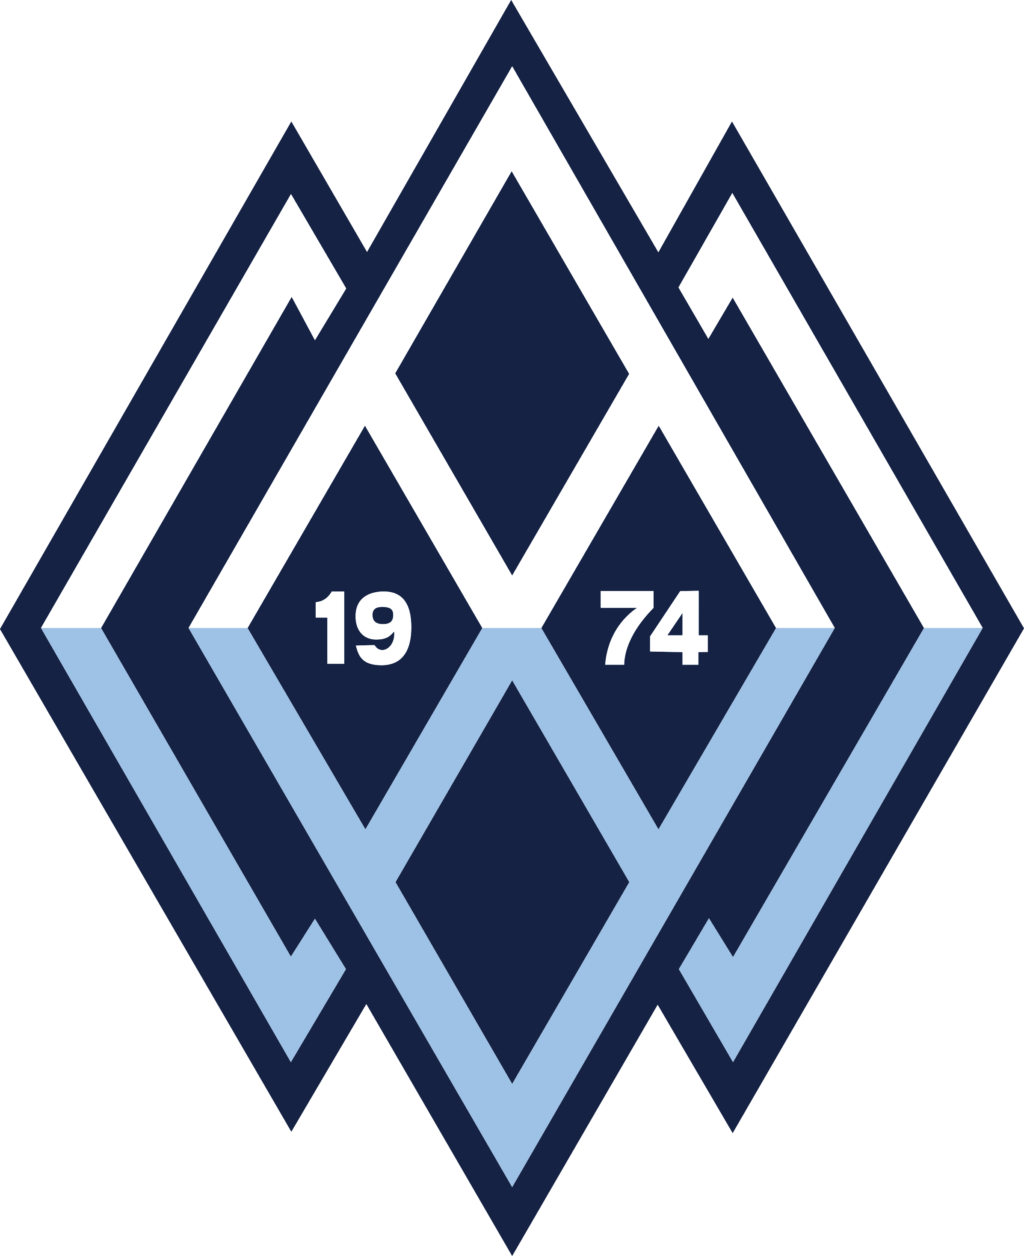 vancouver whitecaps fc 03 1 MLS Vancouver Whitecaps FC SVG, SVG Files For Silhouette, Vancouver Whitecaps FC Files For Cricut, Vancouver Whitecaps FC SVG, DXF, EPS, PNG Instant Download. Vancouver Whitecaps FC SVG, SVG Files For Silhouette, Vancouver Whitecaps FC Files For Cricut, Vancouver Whitecaps FC SVG, DXF, EPS, PNG Instant Download.